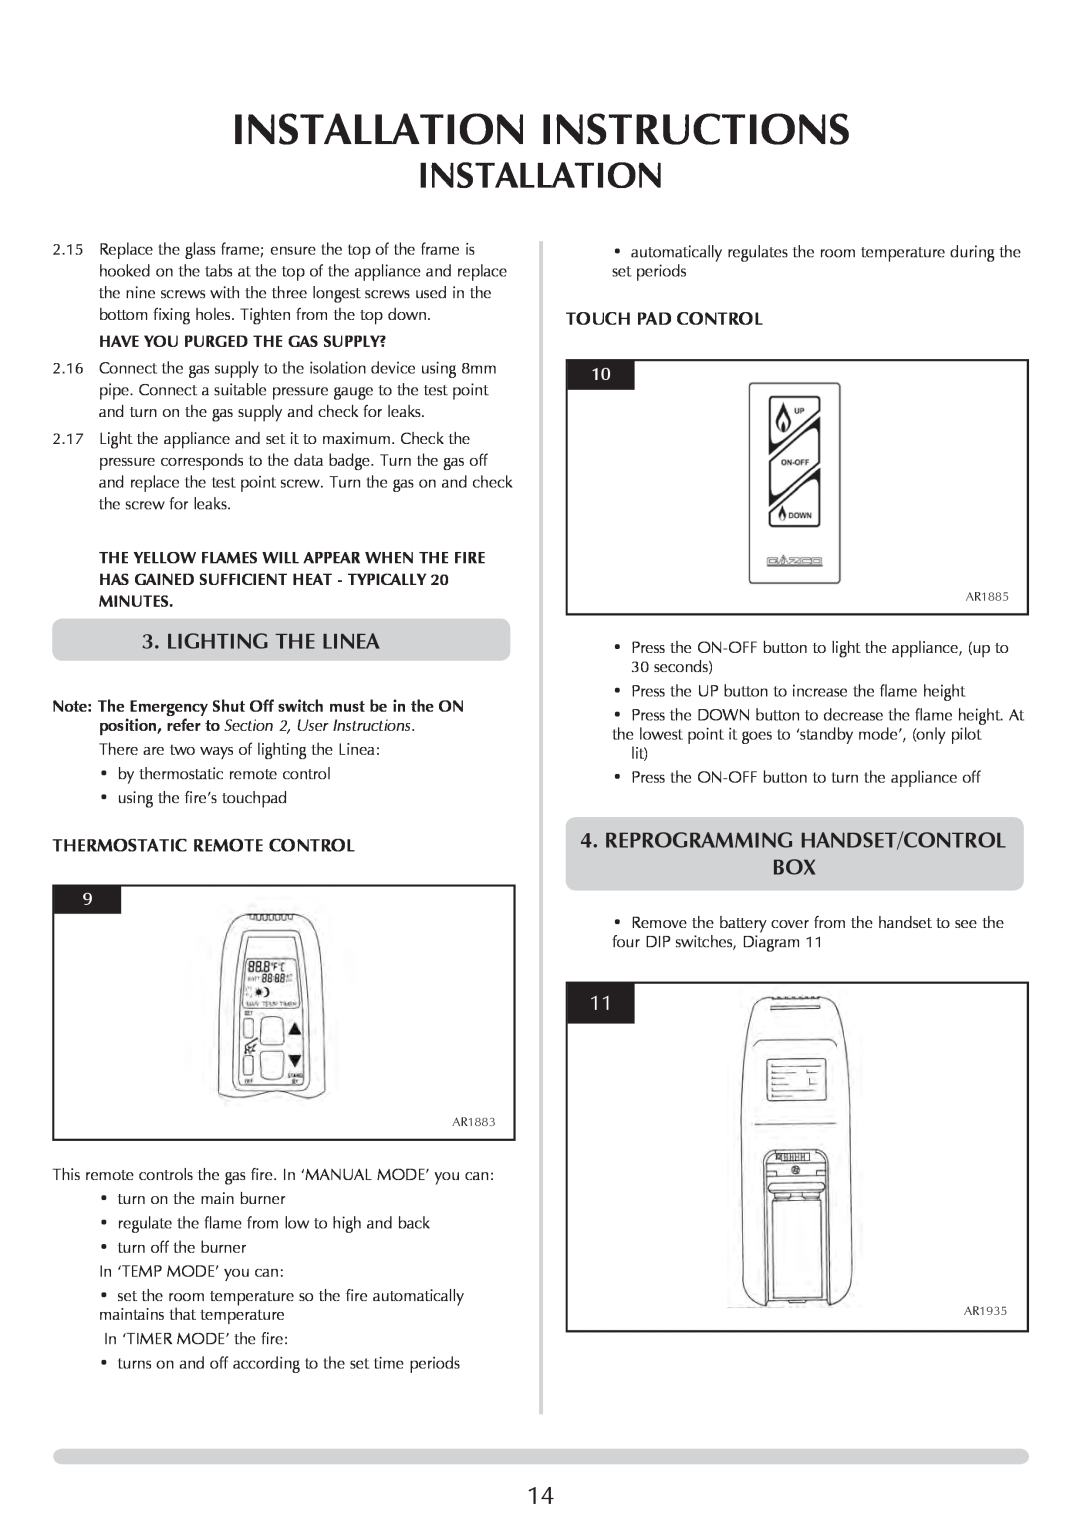 Stovax PR0731 Installation Instructions, Reprogramming Handset/Control Box, Thermostatic Remote Control, Touch Pad Control 